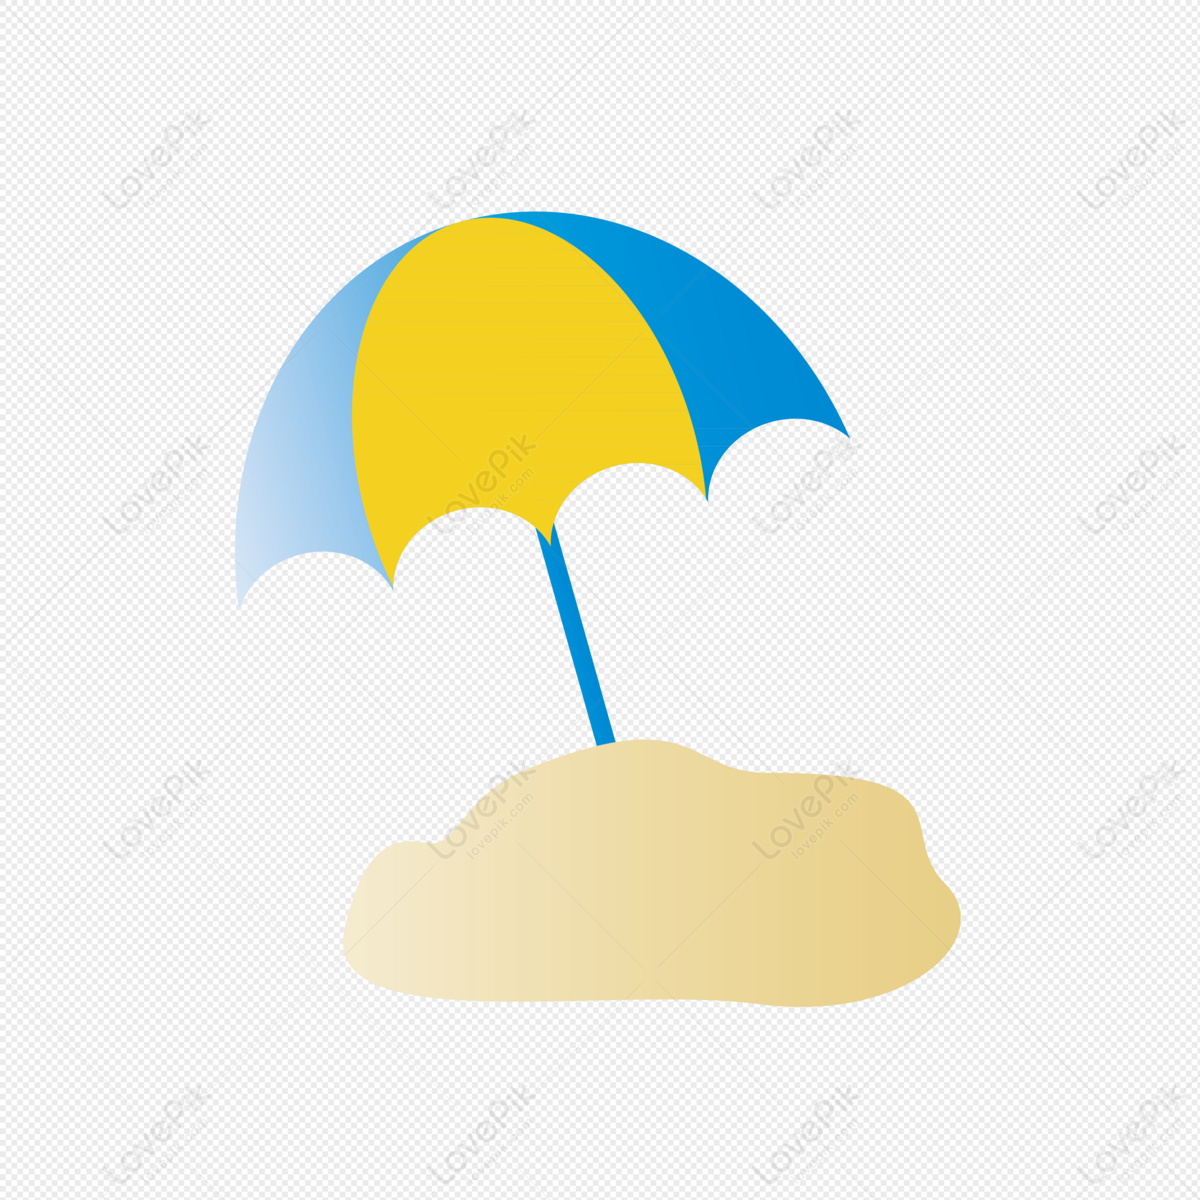 Beach Umbrella PNG Transparent Background And Clipart Image For Free  Download - Lovepik | 401188580